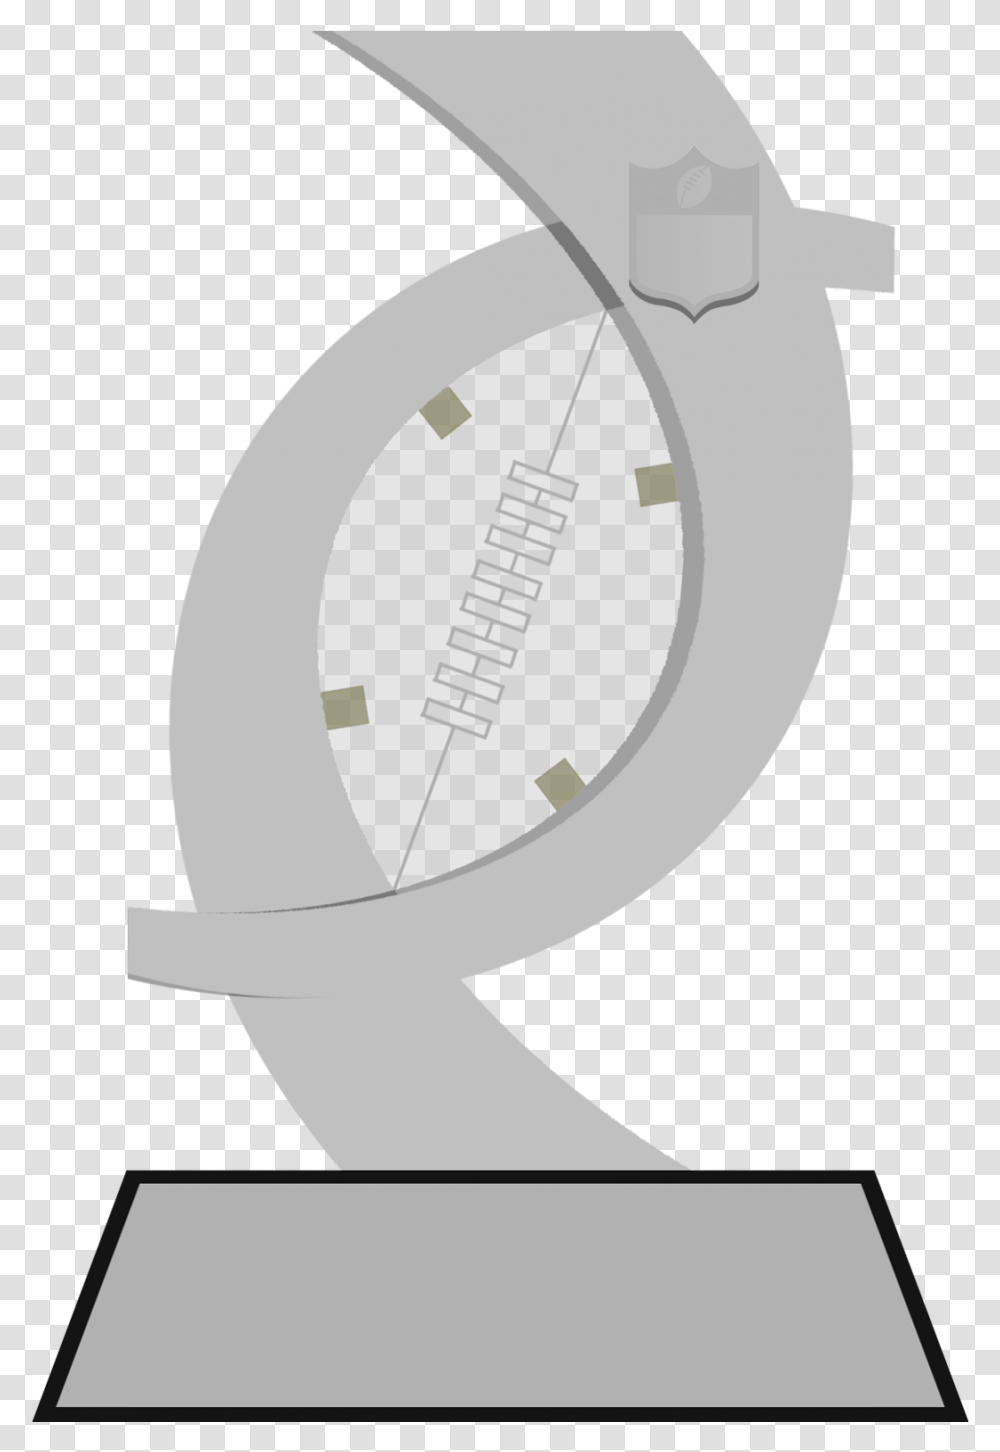 Fedex Nfl Player Of The Year Fedex Player Of The Year Trophy, Lute, Musical Instrument, Mandolin, Leisure Activities Transparent Png